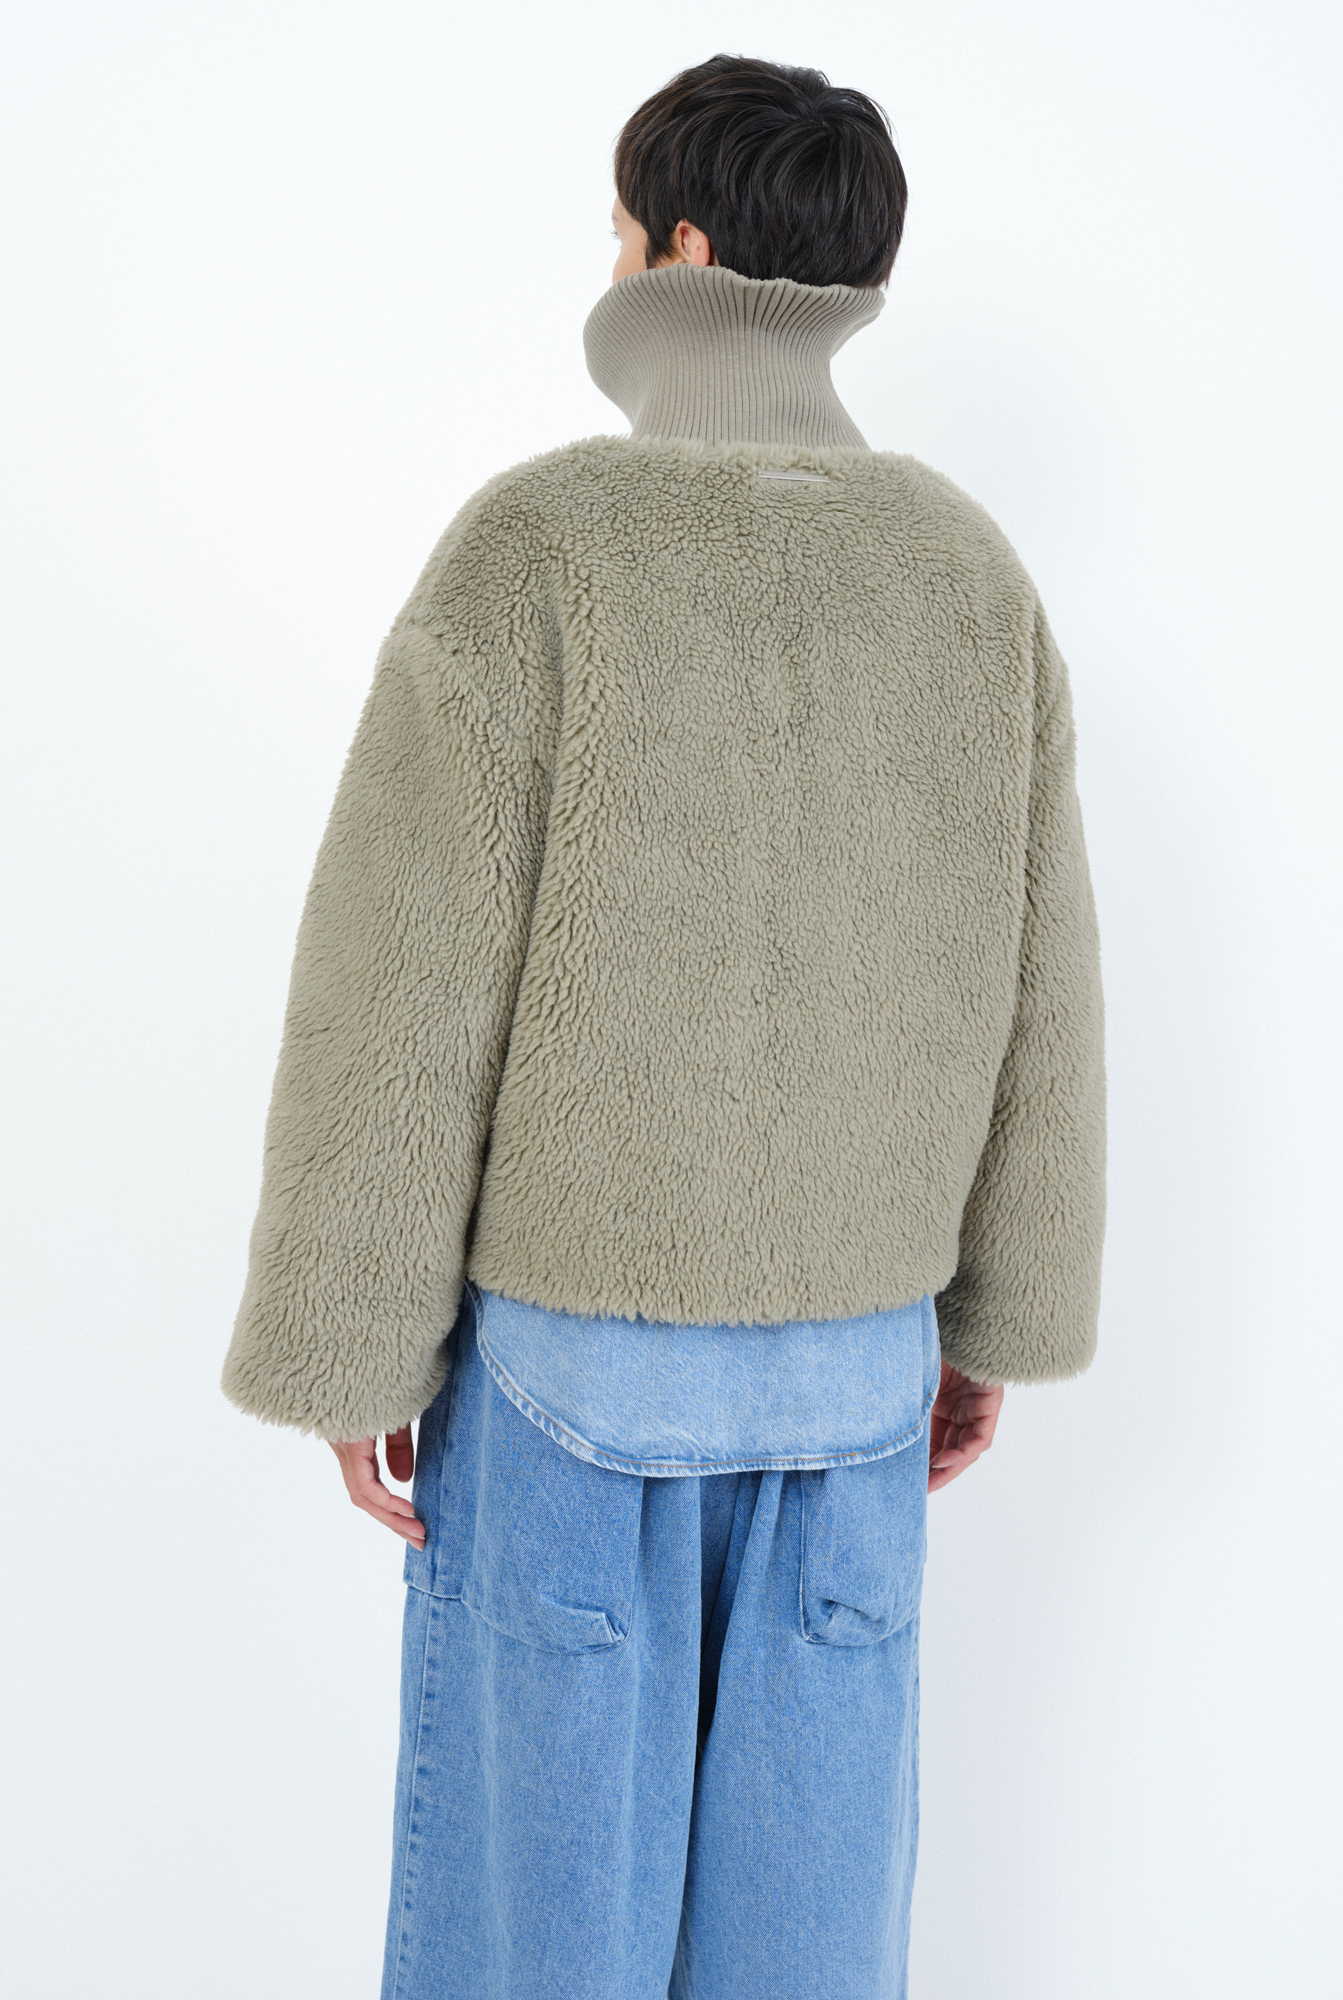 Korsika Teddy Bomber Pale Olive from Shop Like You Give a Damn